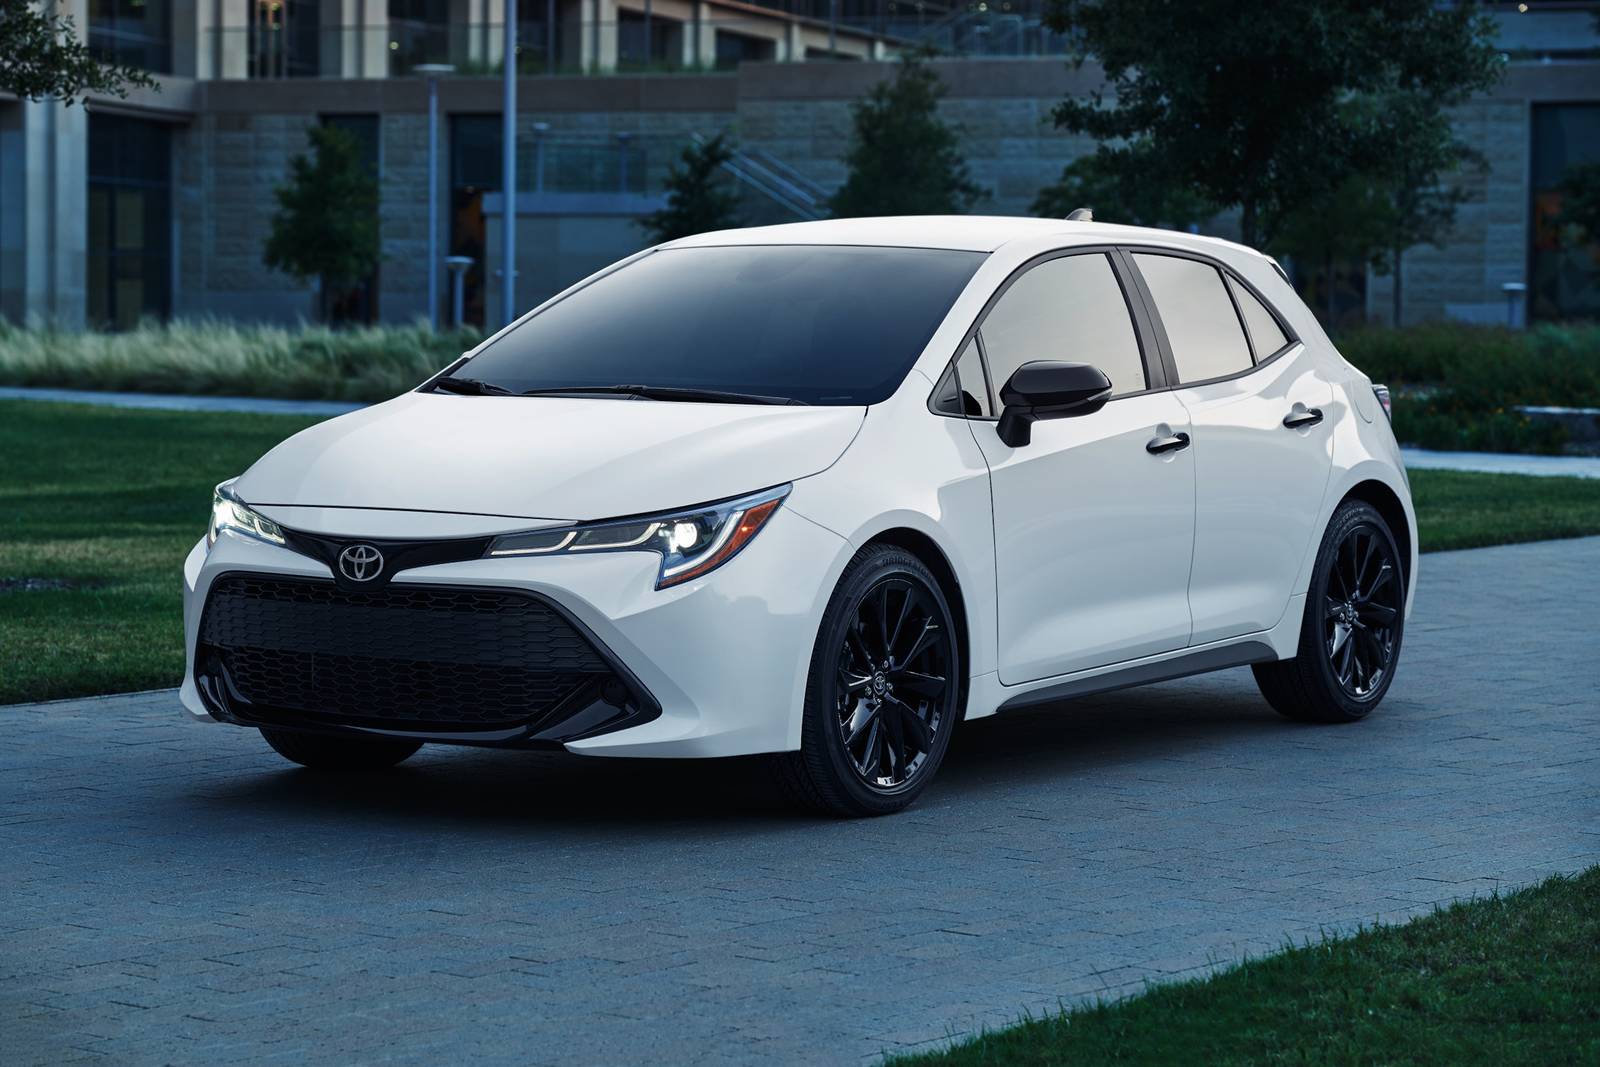 2020 Toyota Corolla Hatchback Review & Ratings | Edmunds